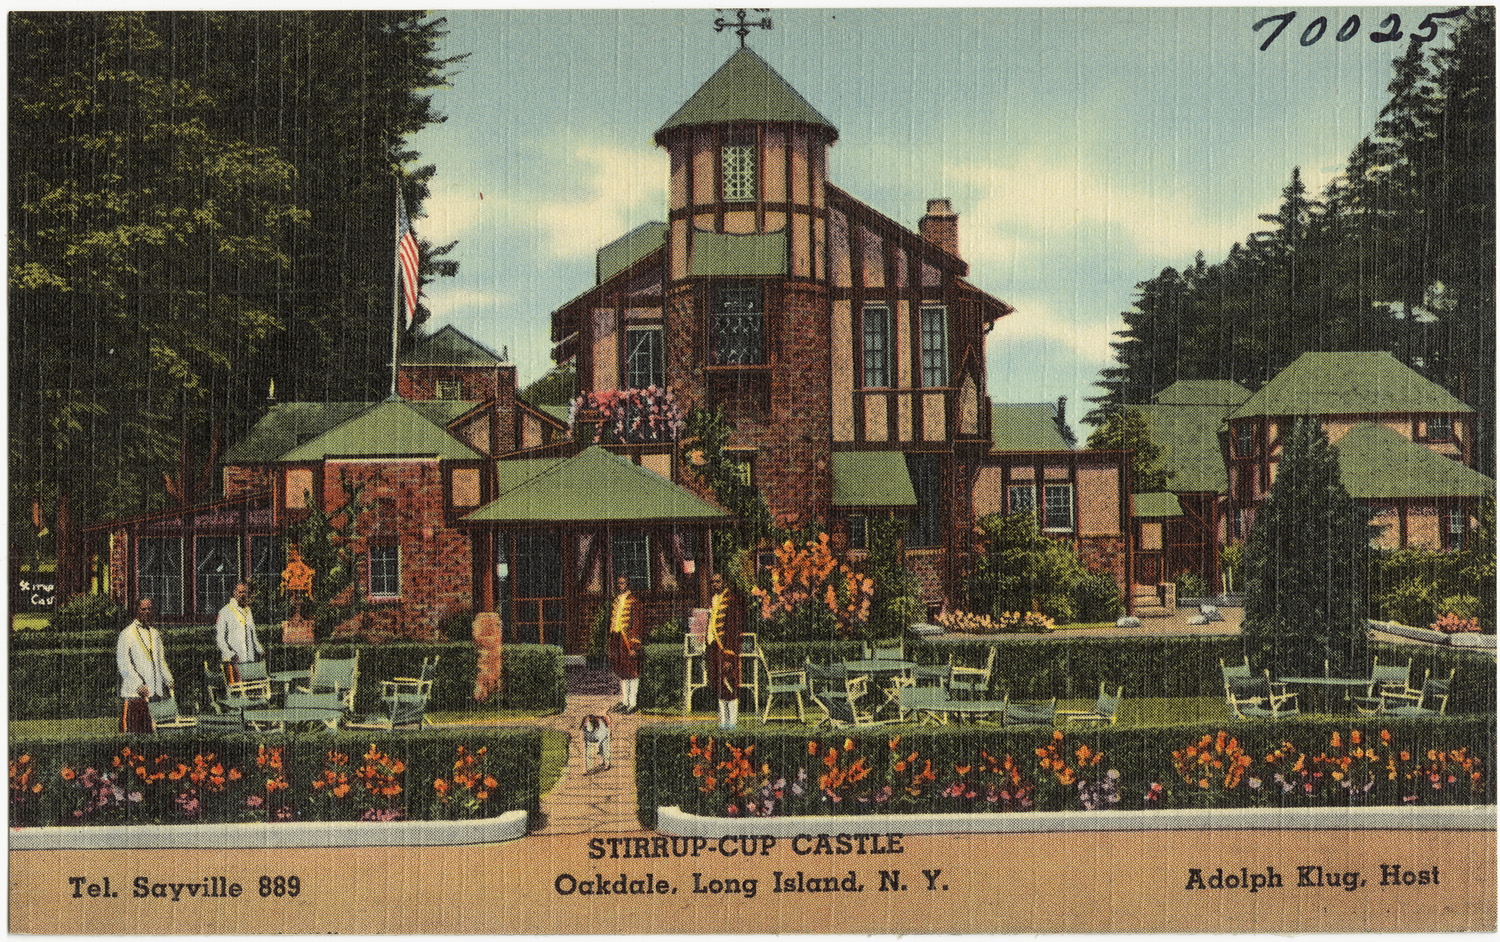 an old postcard features an ornate building surrounded by flowering gardens